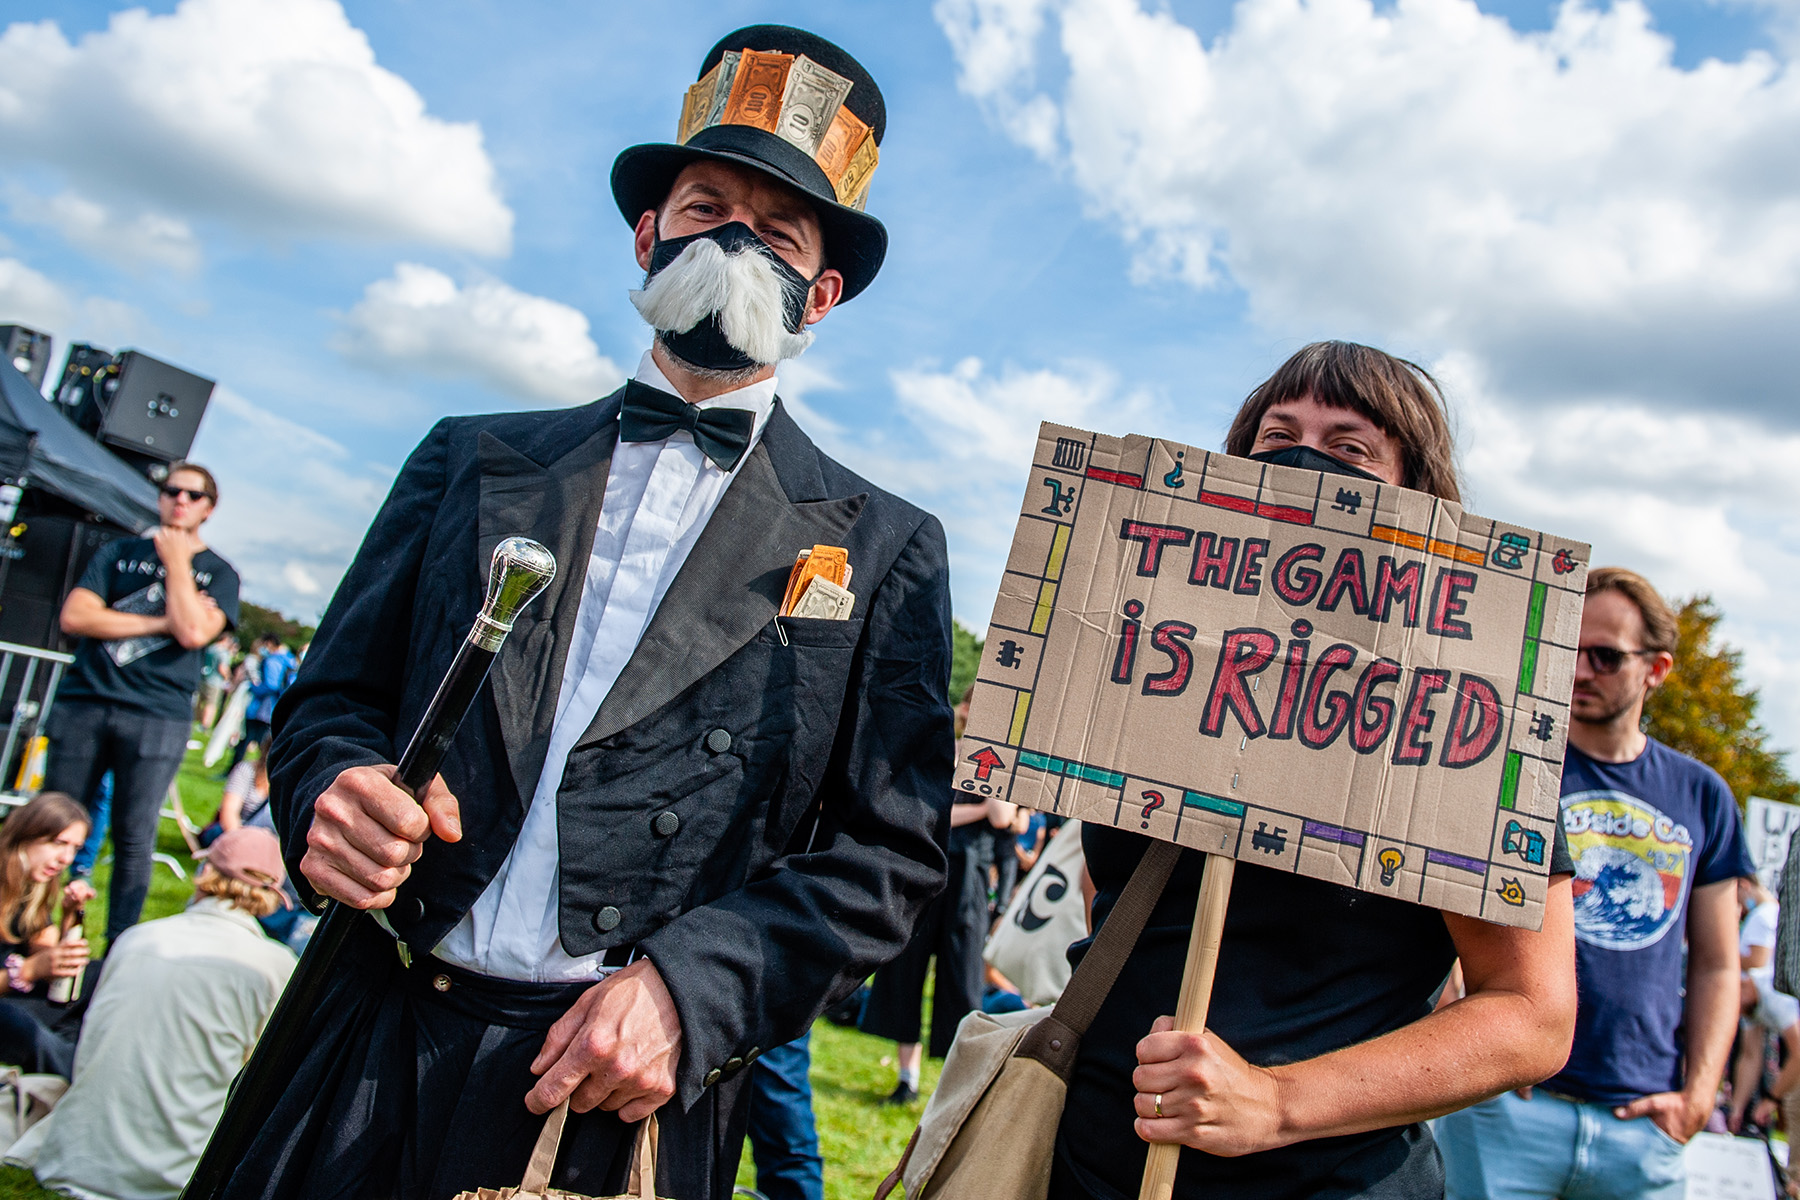 Protester is dressed as the monopoly man, while another is carrying a monopoly sign that says "the game is rigged".